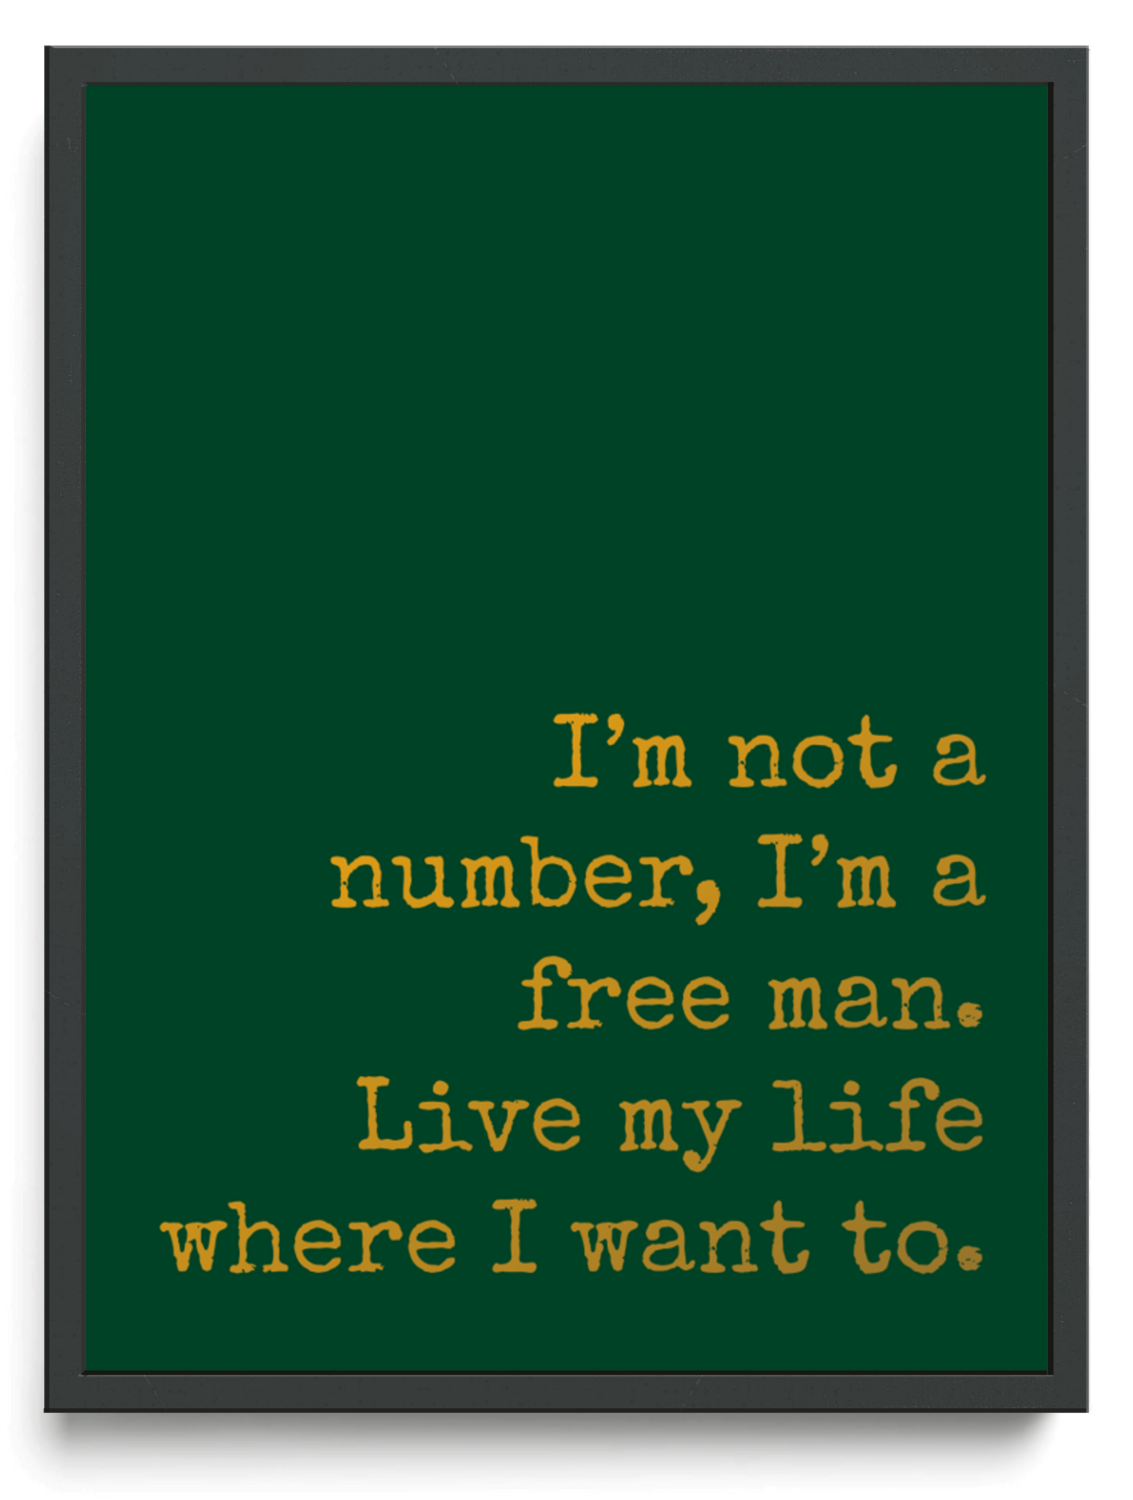 I’m not a number, I’m a free man. Live my life where I want to. framed typographic print